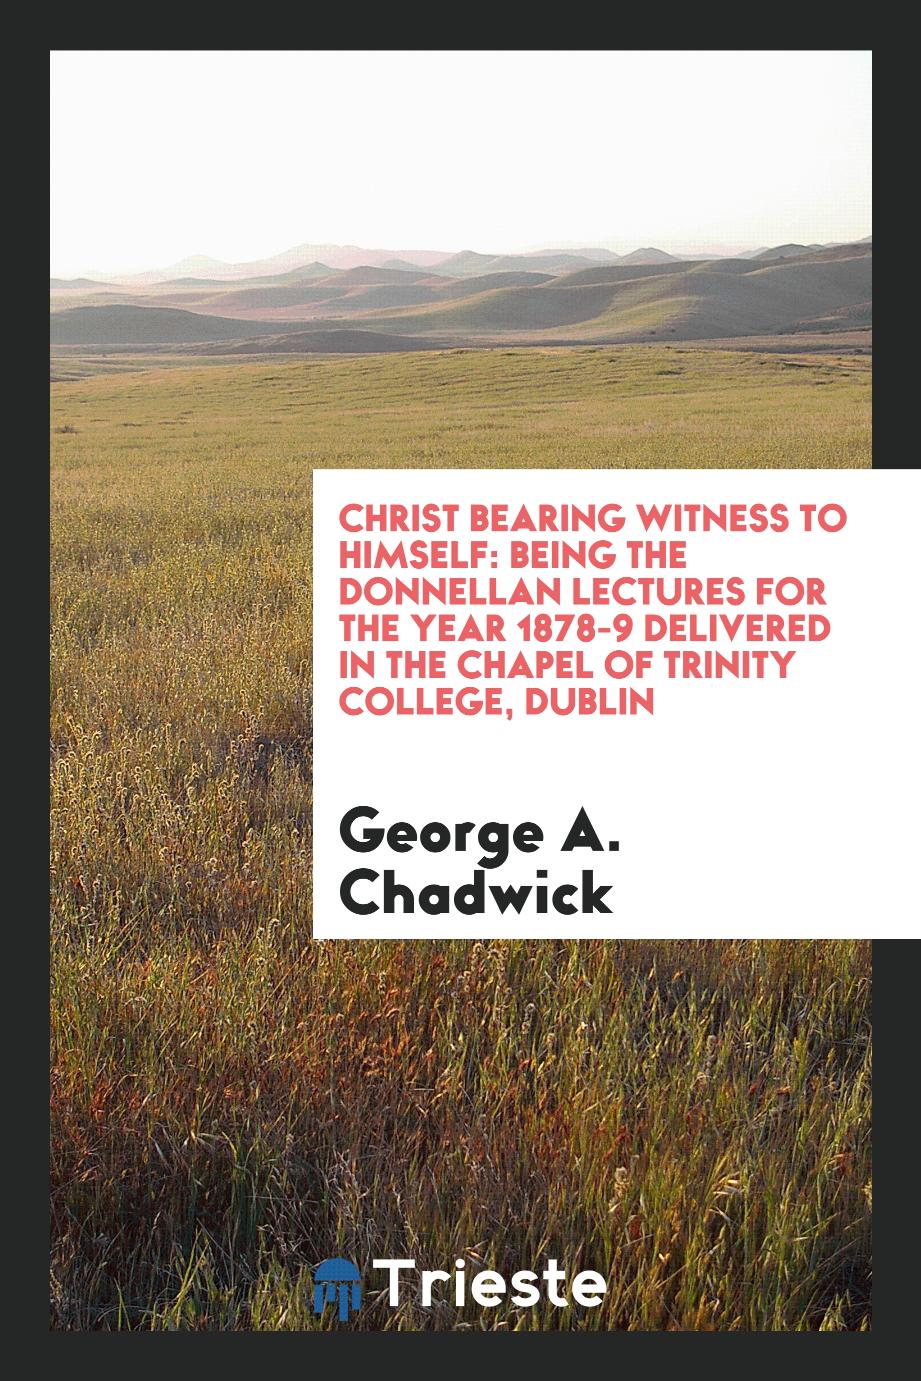 Christ bearing witness to himself: being the Donnellan Lectures for the year 1878-9 delivered in the Chapel of Trinity College, Dublin